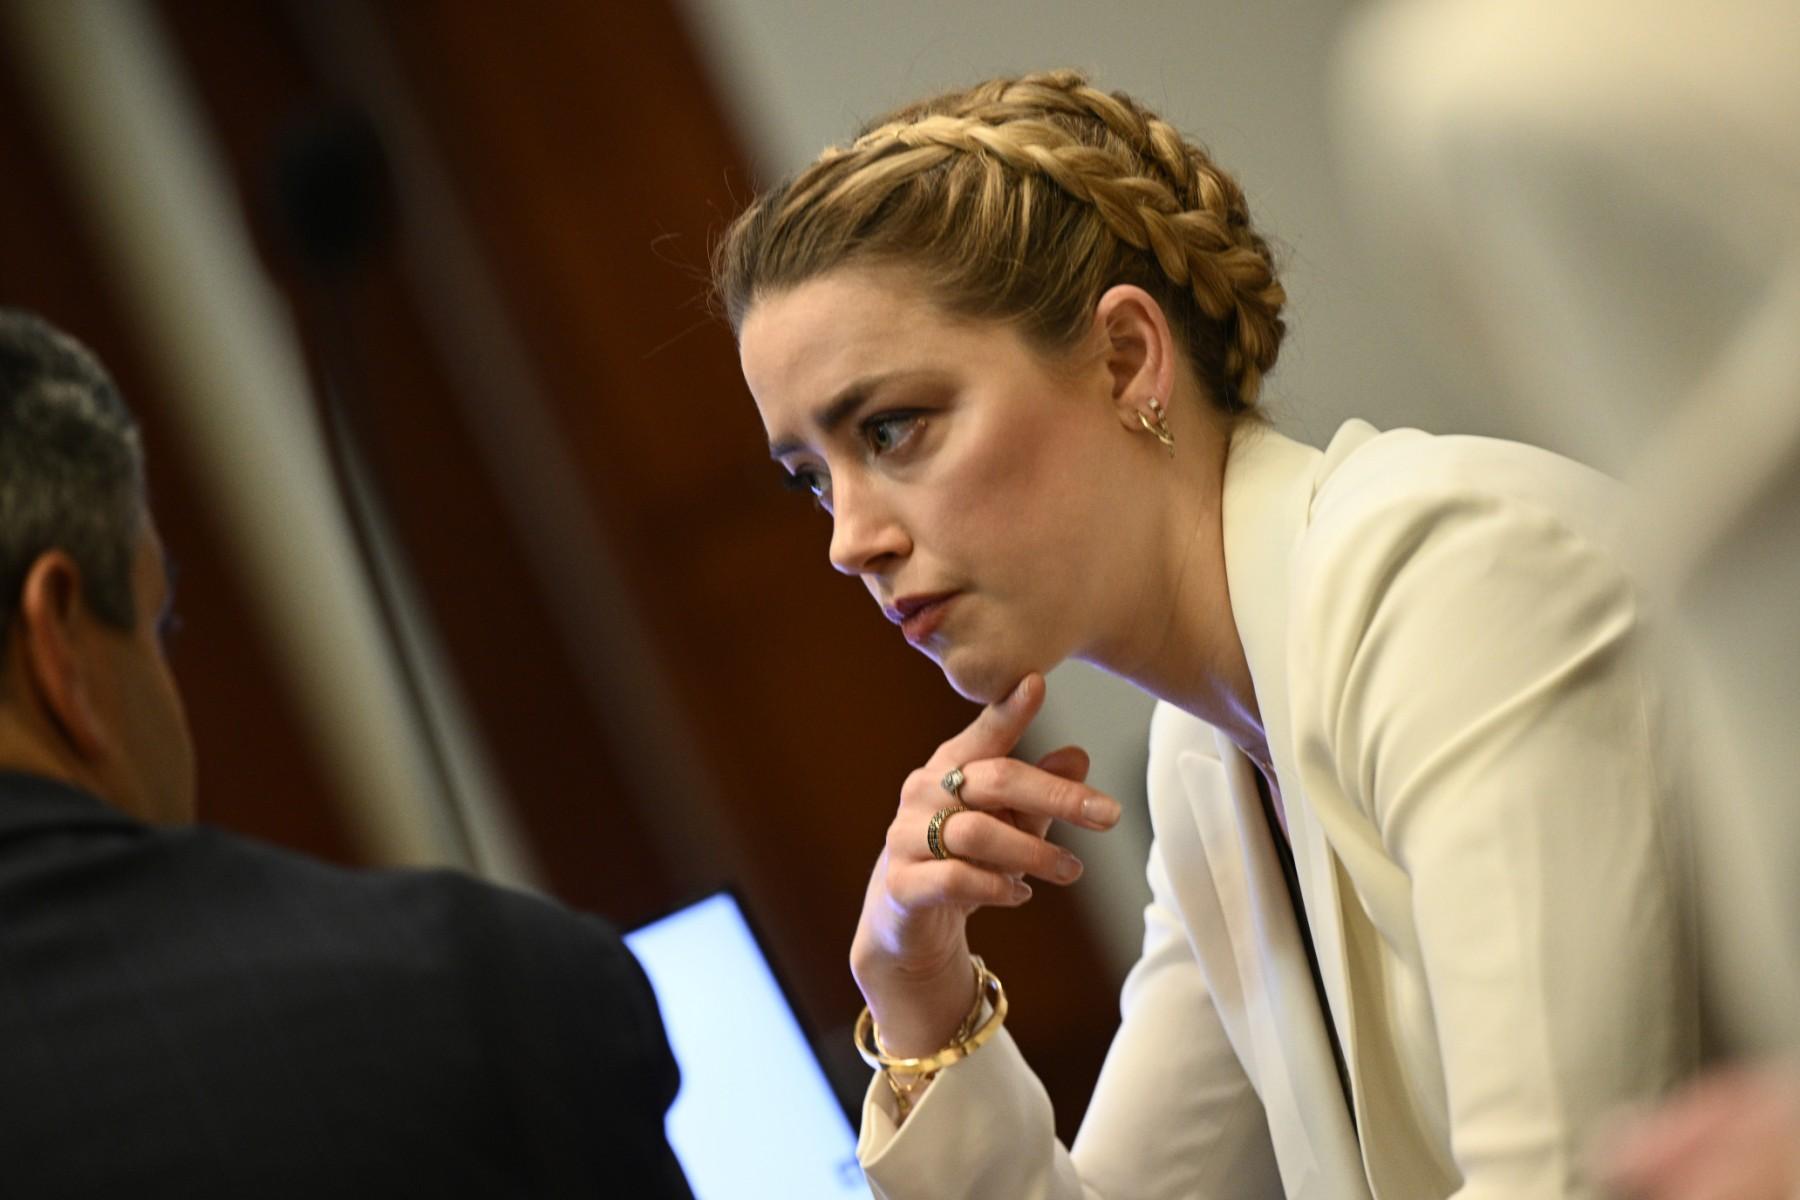 Actress Amber Heard arrives at the courtroom for the defamation trial against her at the Fairfax County Circuit Courthouse in Fairfax, Virginia, April 26. Photo: AFP